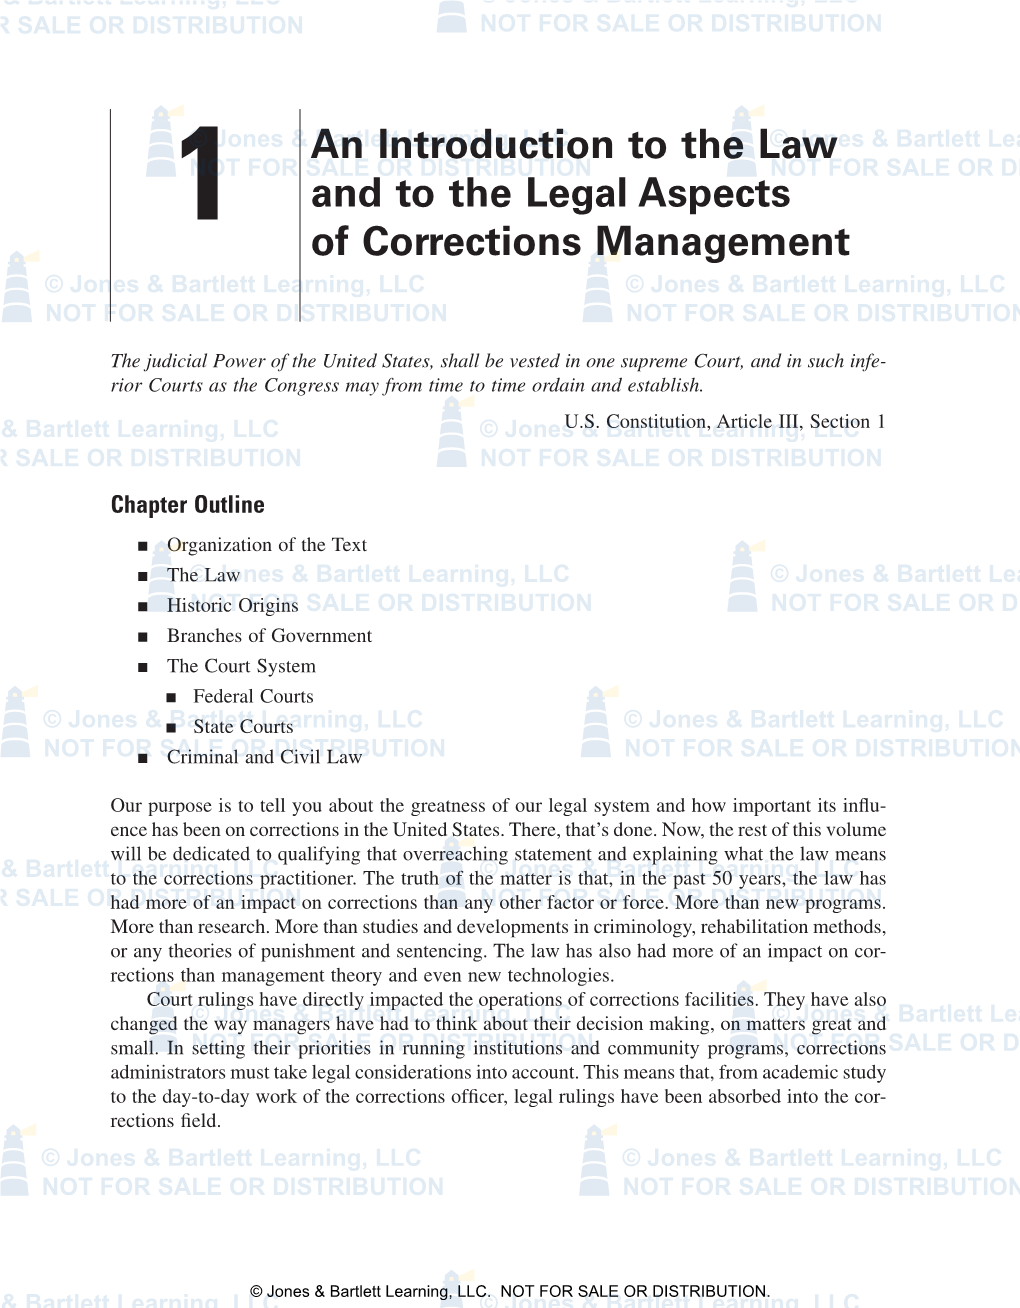 An Introduction to the Law and to the Legal Aspects of Corrections